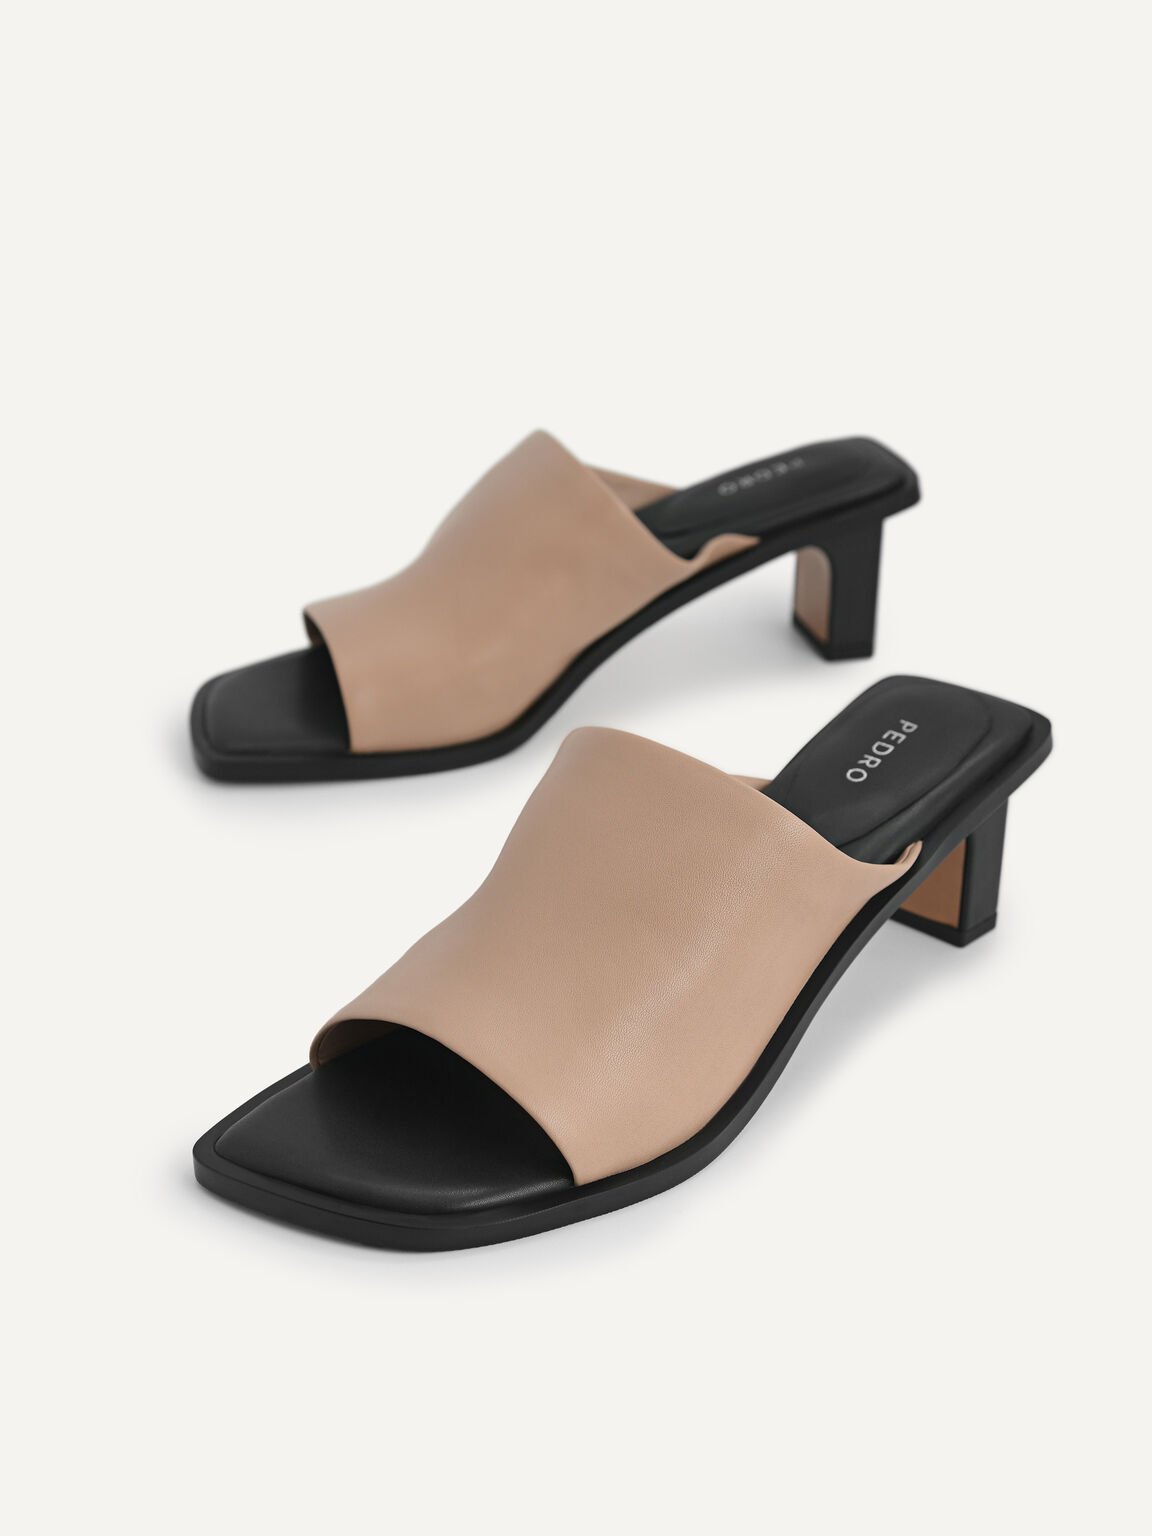 Leather Heeled Mules, Taupe, hi-res